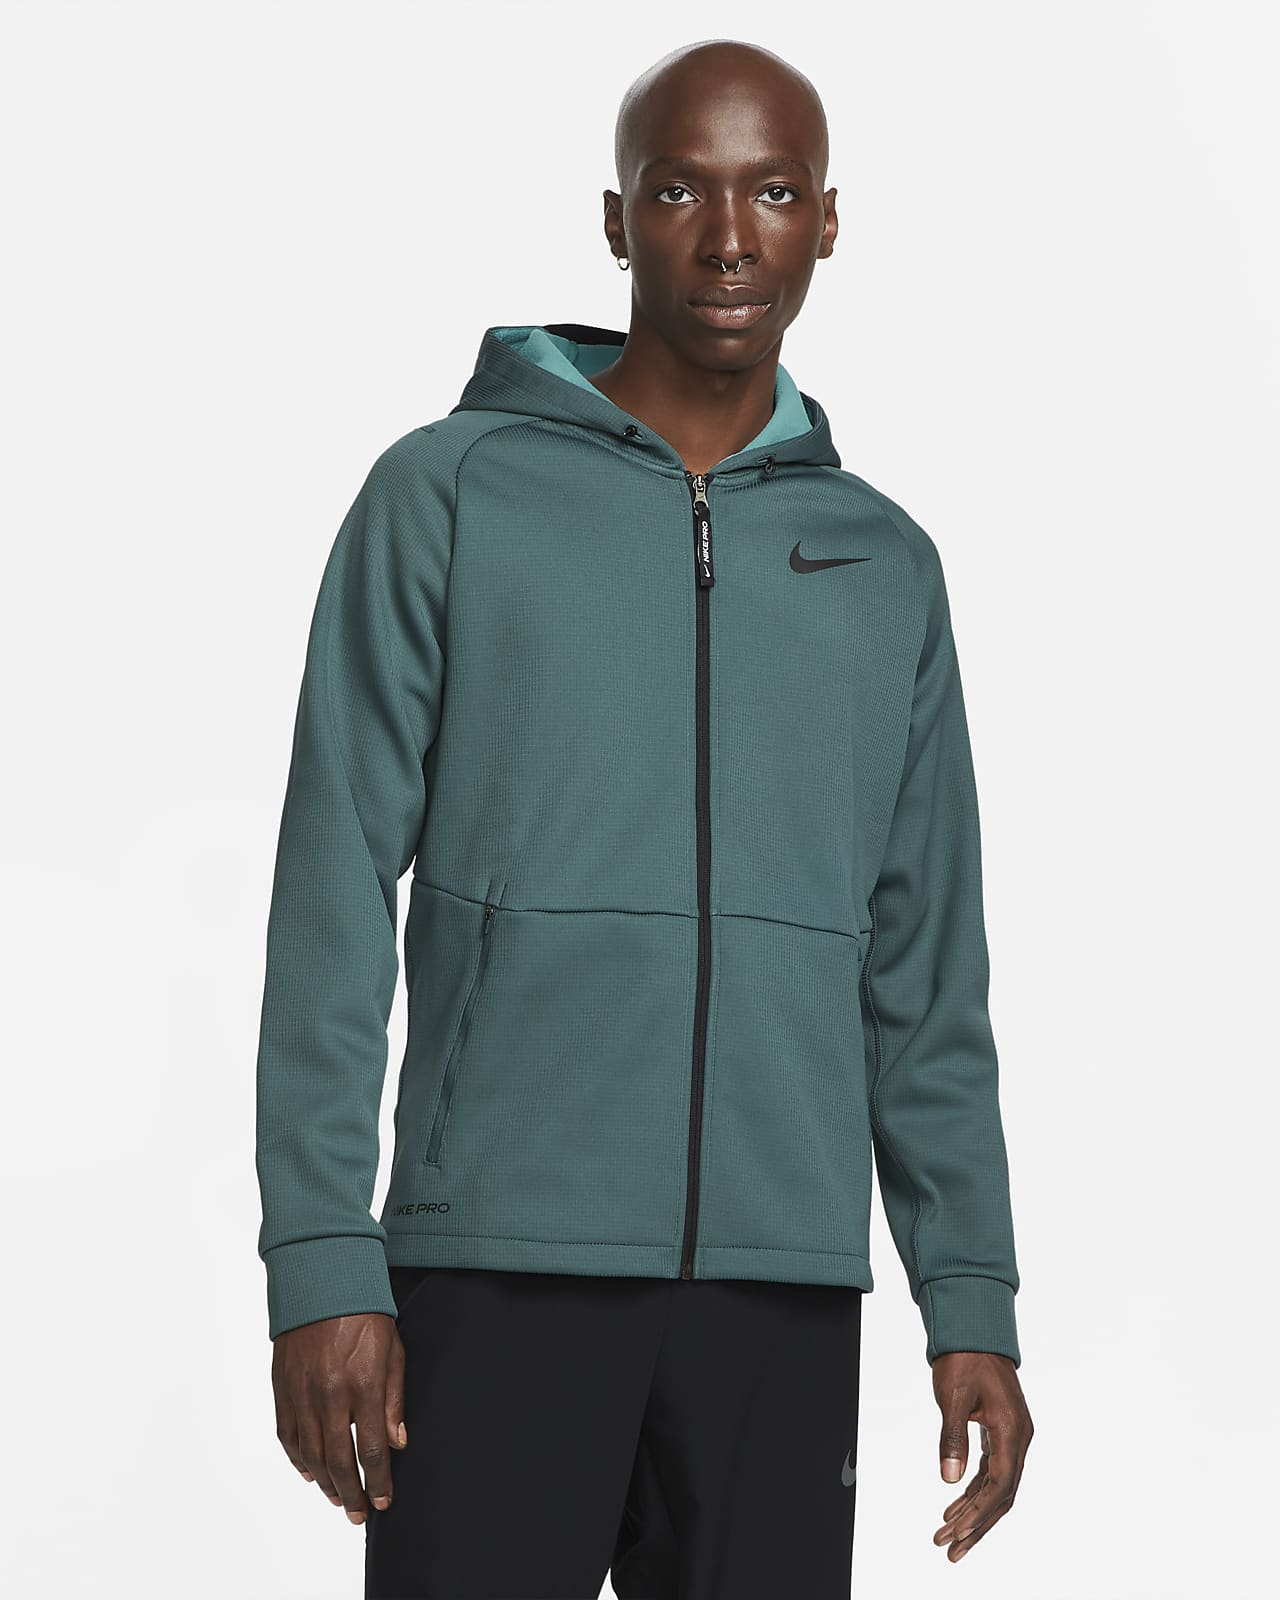 anxiety Nominal I'm sorry Nike Pro Therma-FIT Men's Full-Zip Hooded Jacket. Nike.com